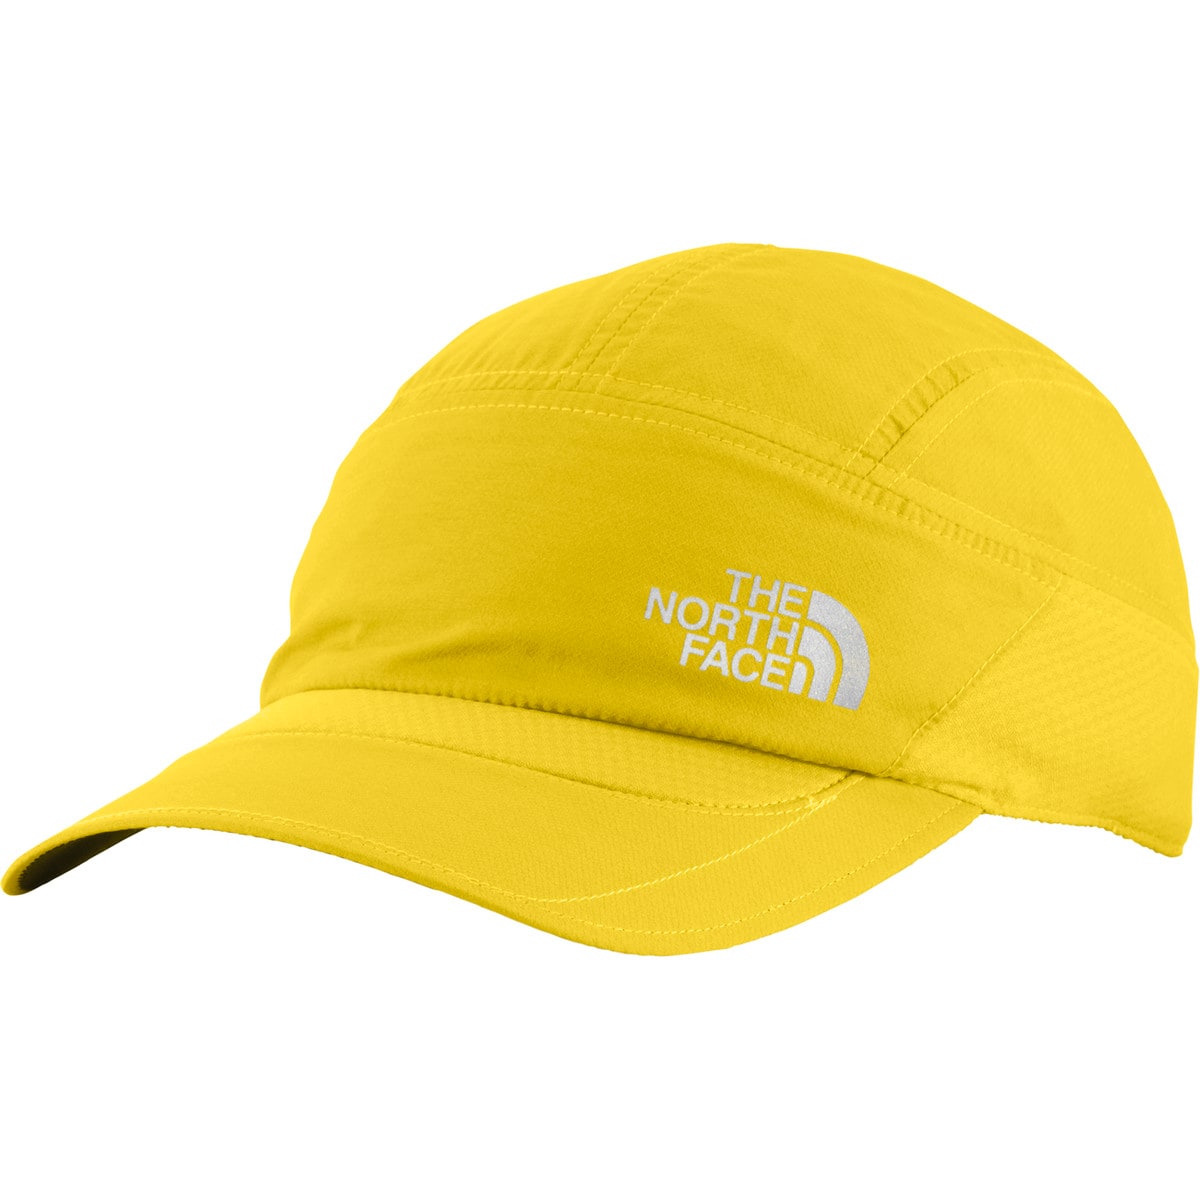 The North Face Casquette Better Than Naked Casquettes / bandeaux